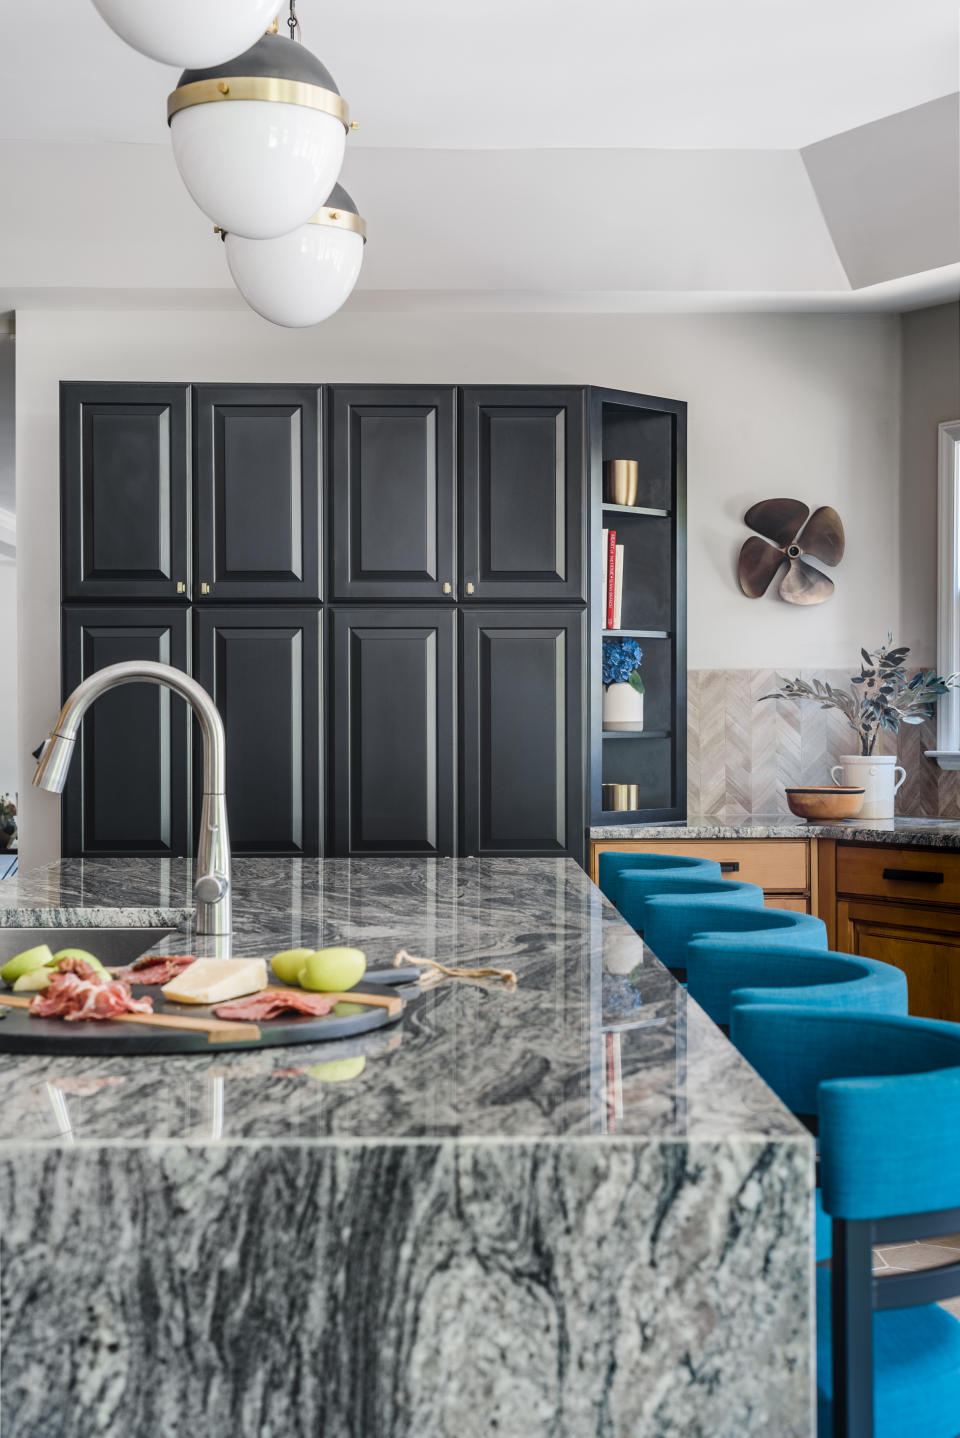 <p> When designing a kitchen, use a combination of colors, materials and finishes to create a characterful look – but just as you would in a living room, limit your palette to one main color and two accents. In this kitchen, interior designer Brenna Morgan used grey as the predominant shade in the marble-look island, with black painted cabinets as an accent next to warmer, stained wood cabinetry and bright turquoise bar stools in this lakeside retreat. </p>